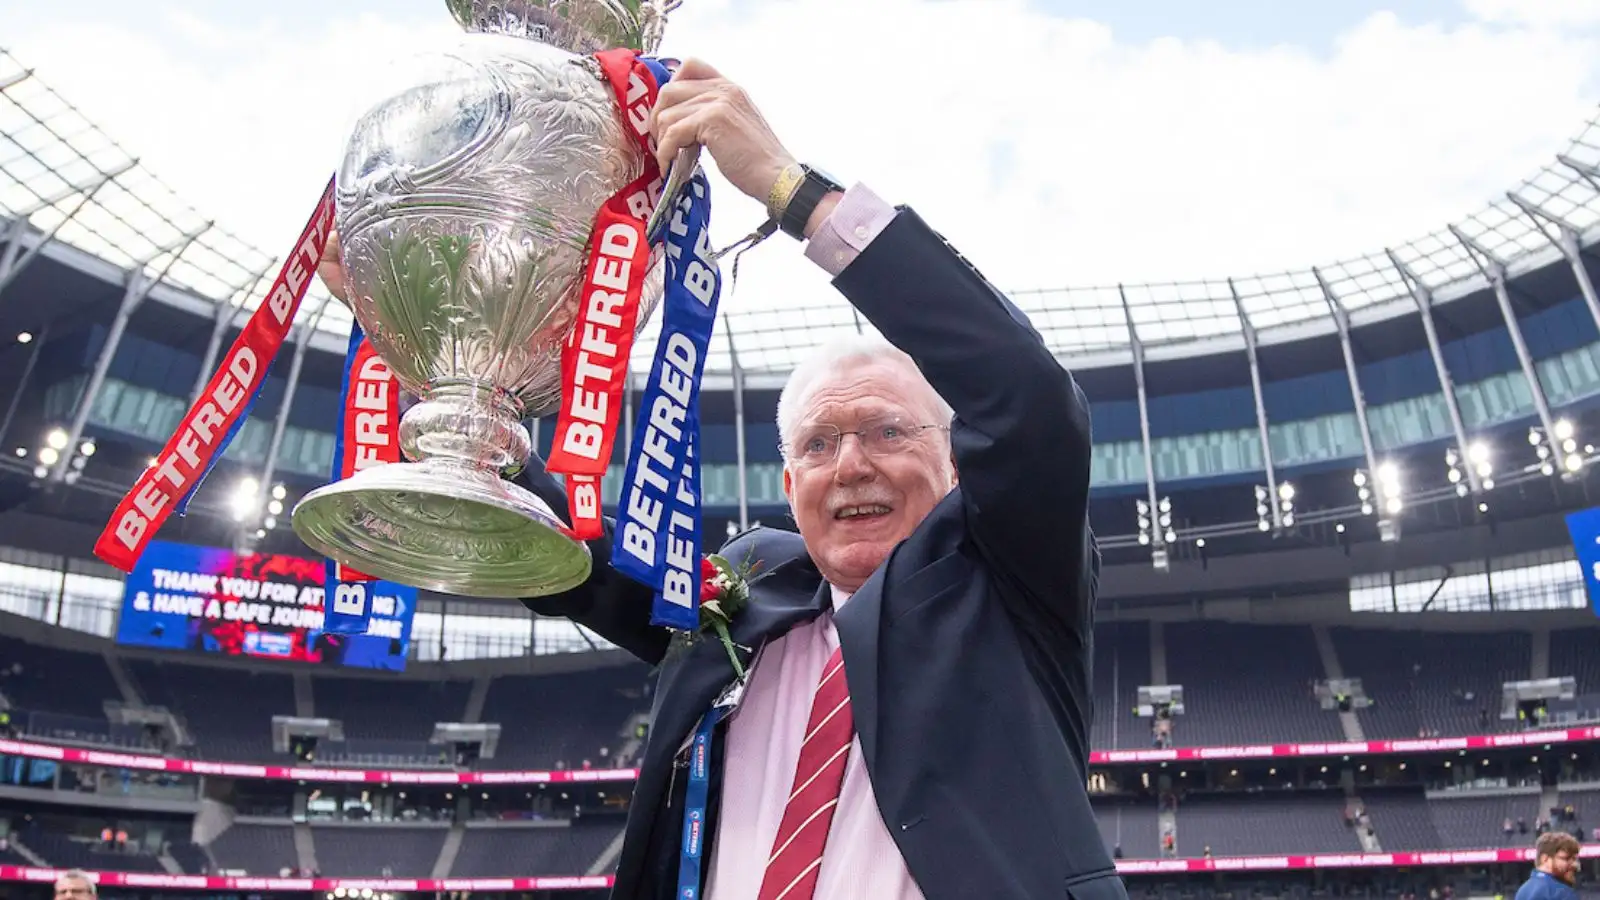 Wigan Warriors chairman Ian Lenagan opens up on health woes as he strives for glorious ending to 16-year reign